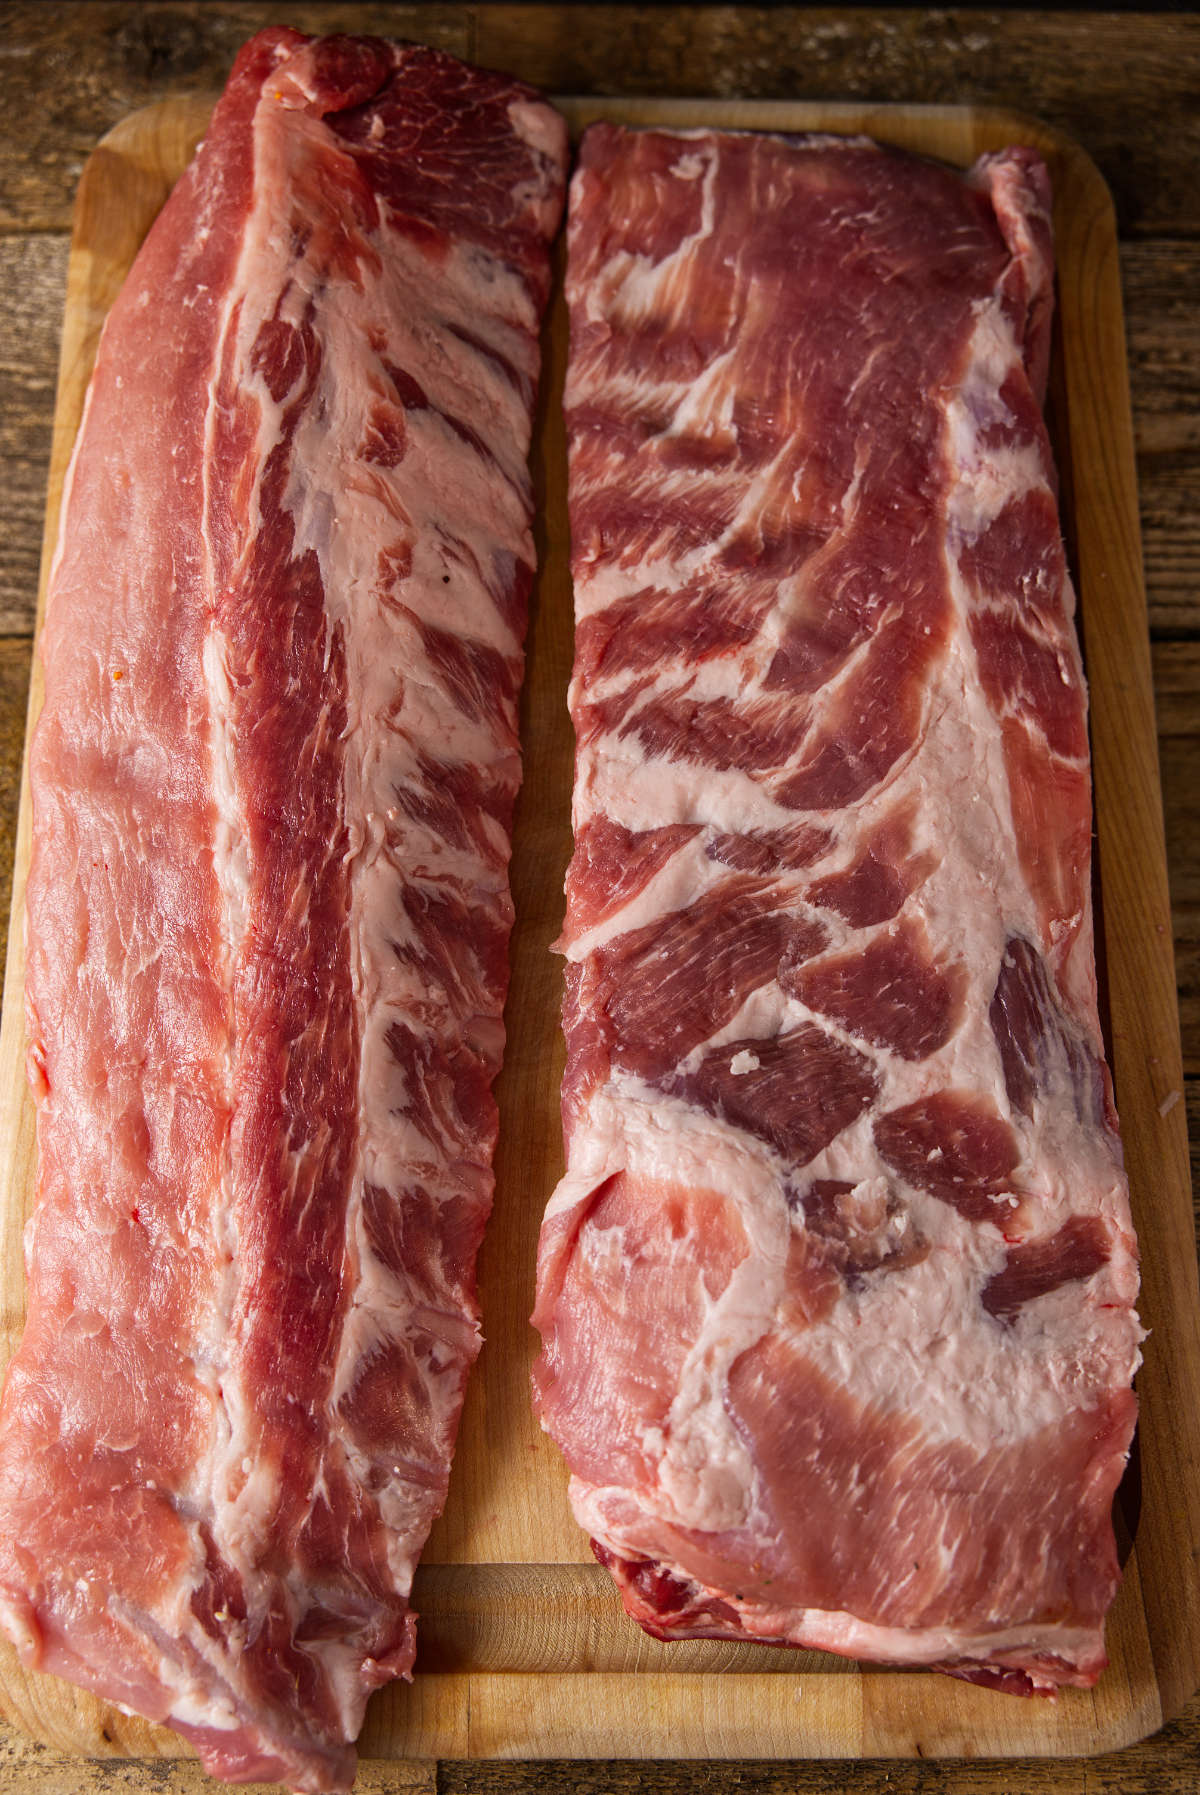 Pork loin back ribs and st. louis style spare ribs on cutting board.